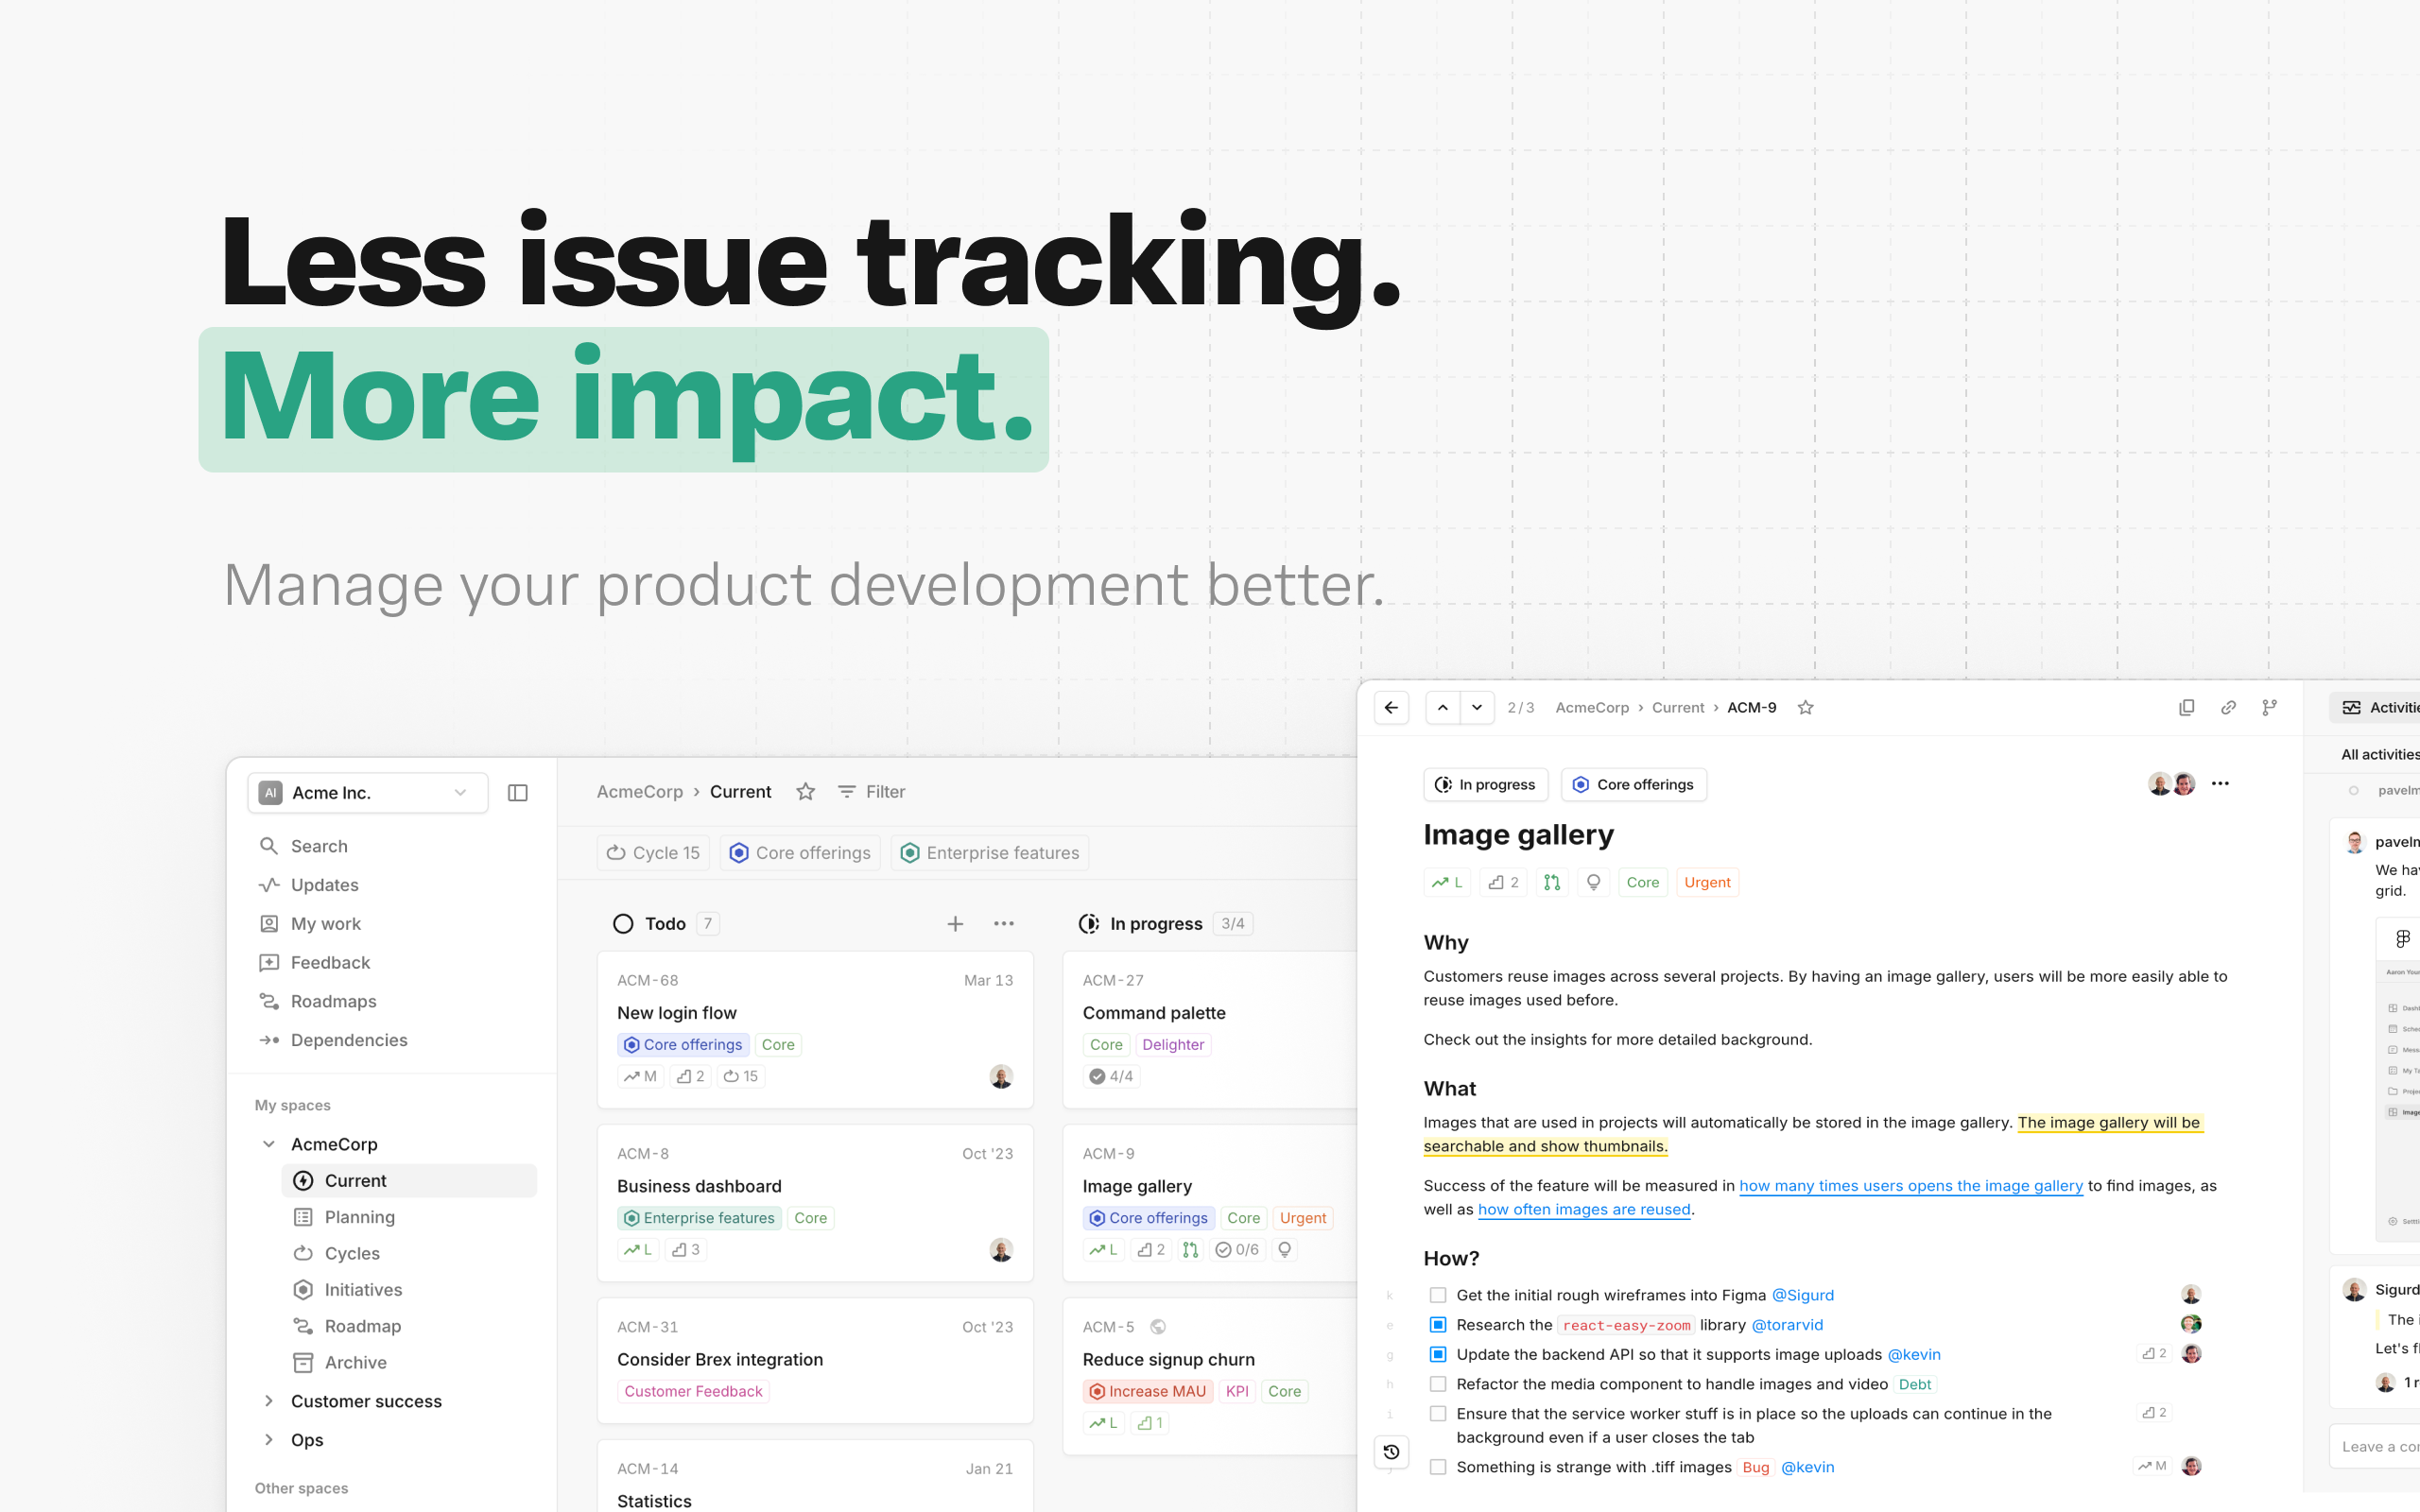 kitemaker-3 - Less issue tracking, more impact